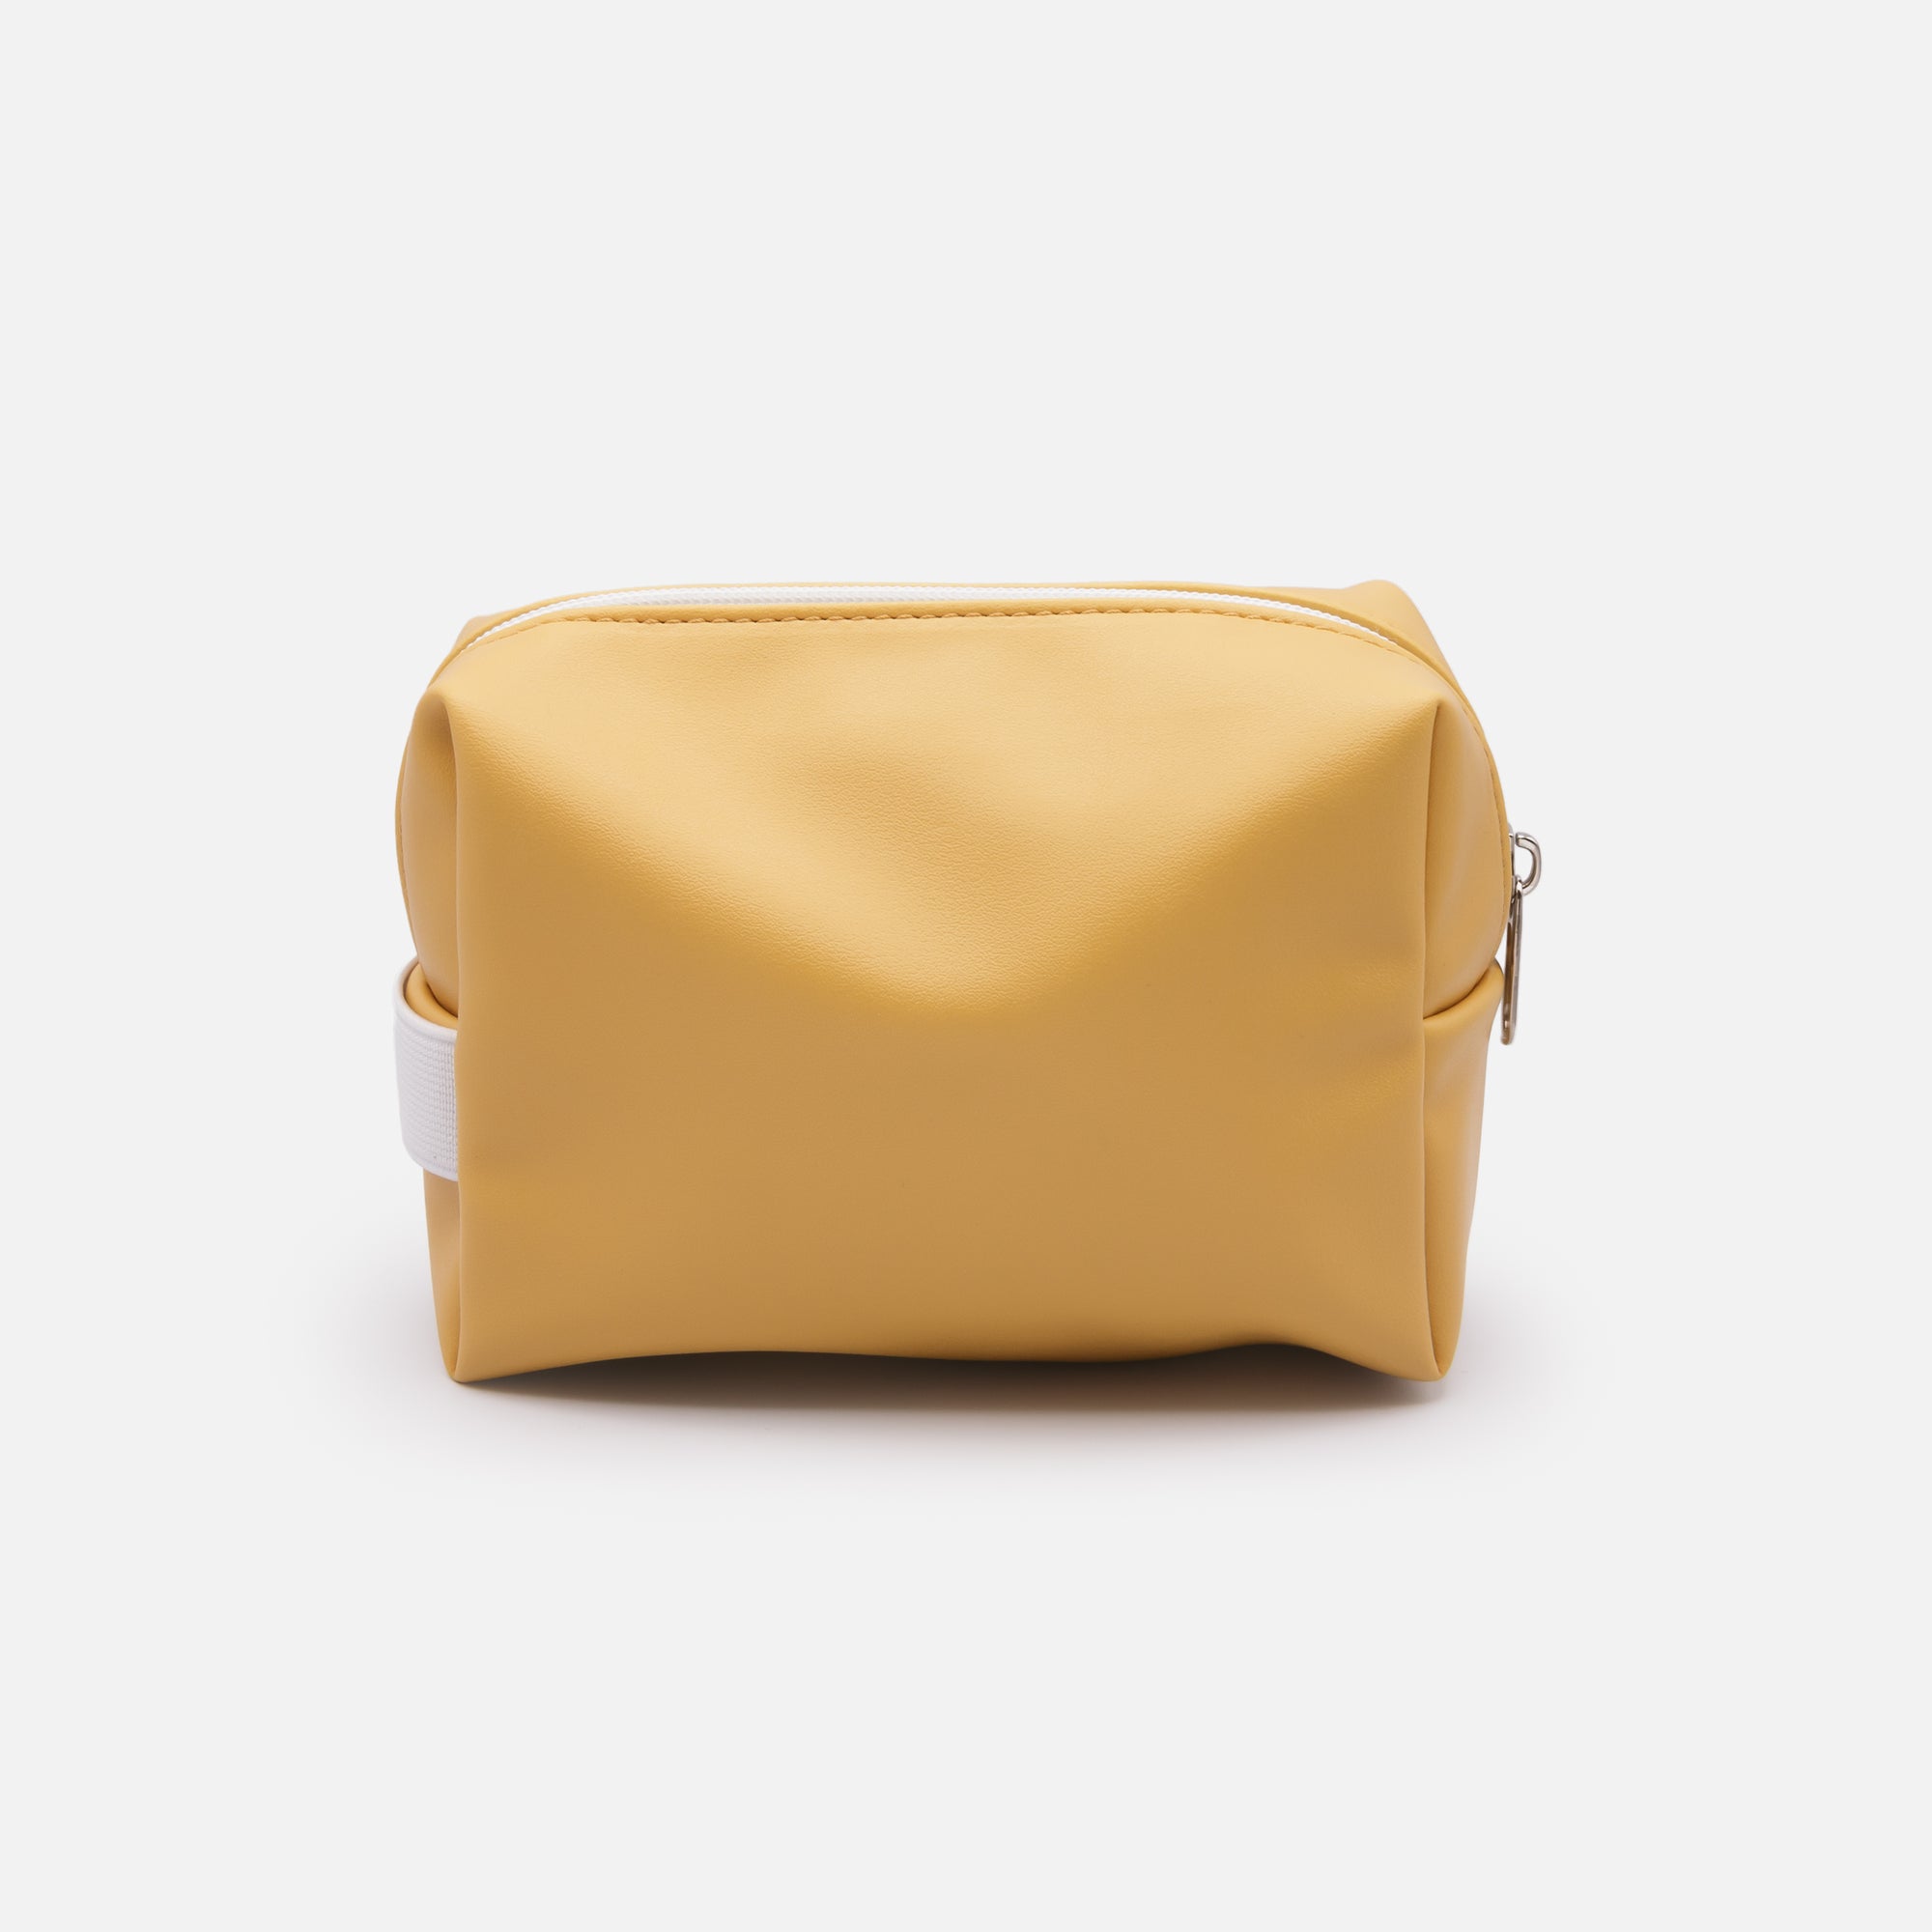 Tangerine cosmetic pouch